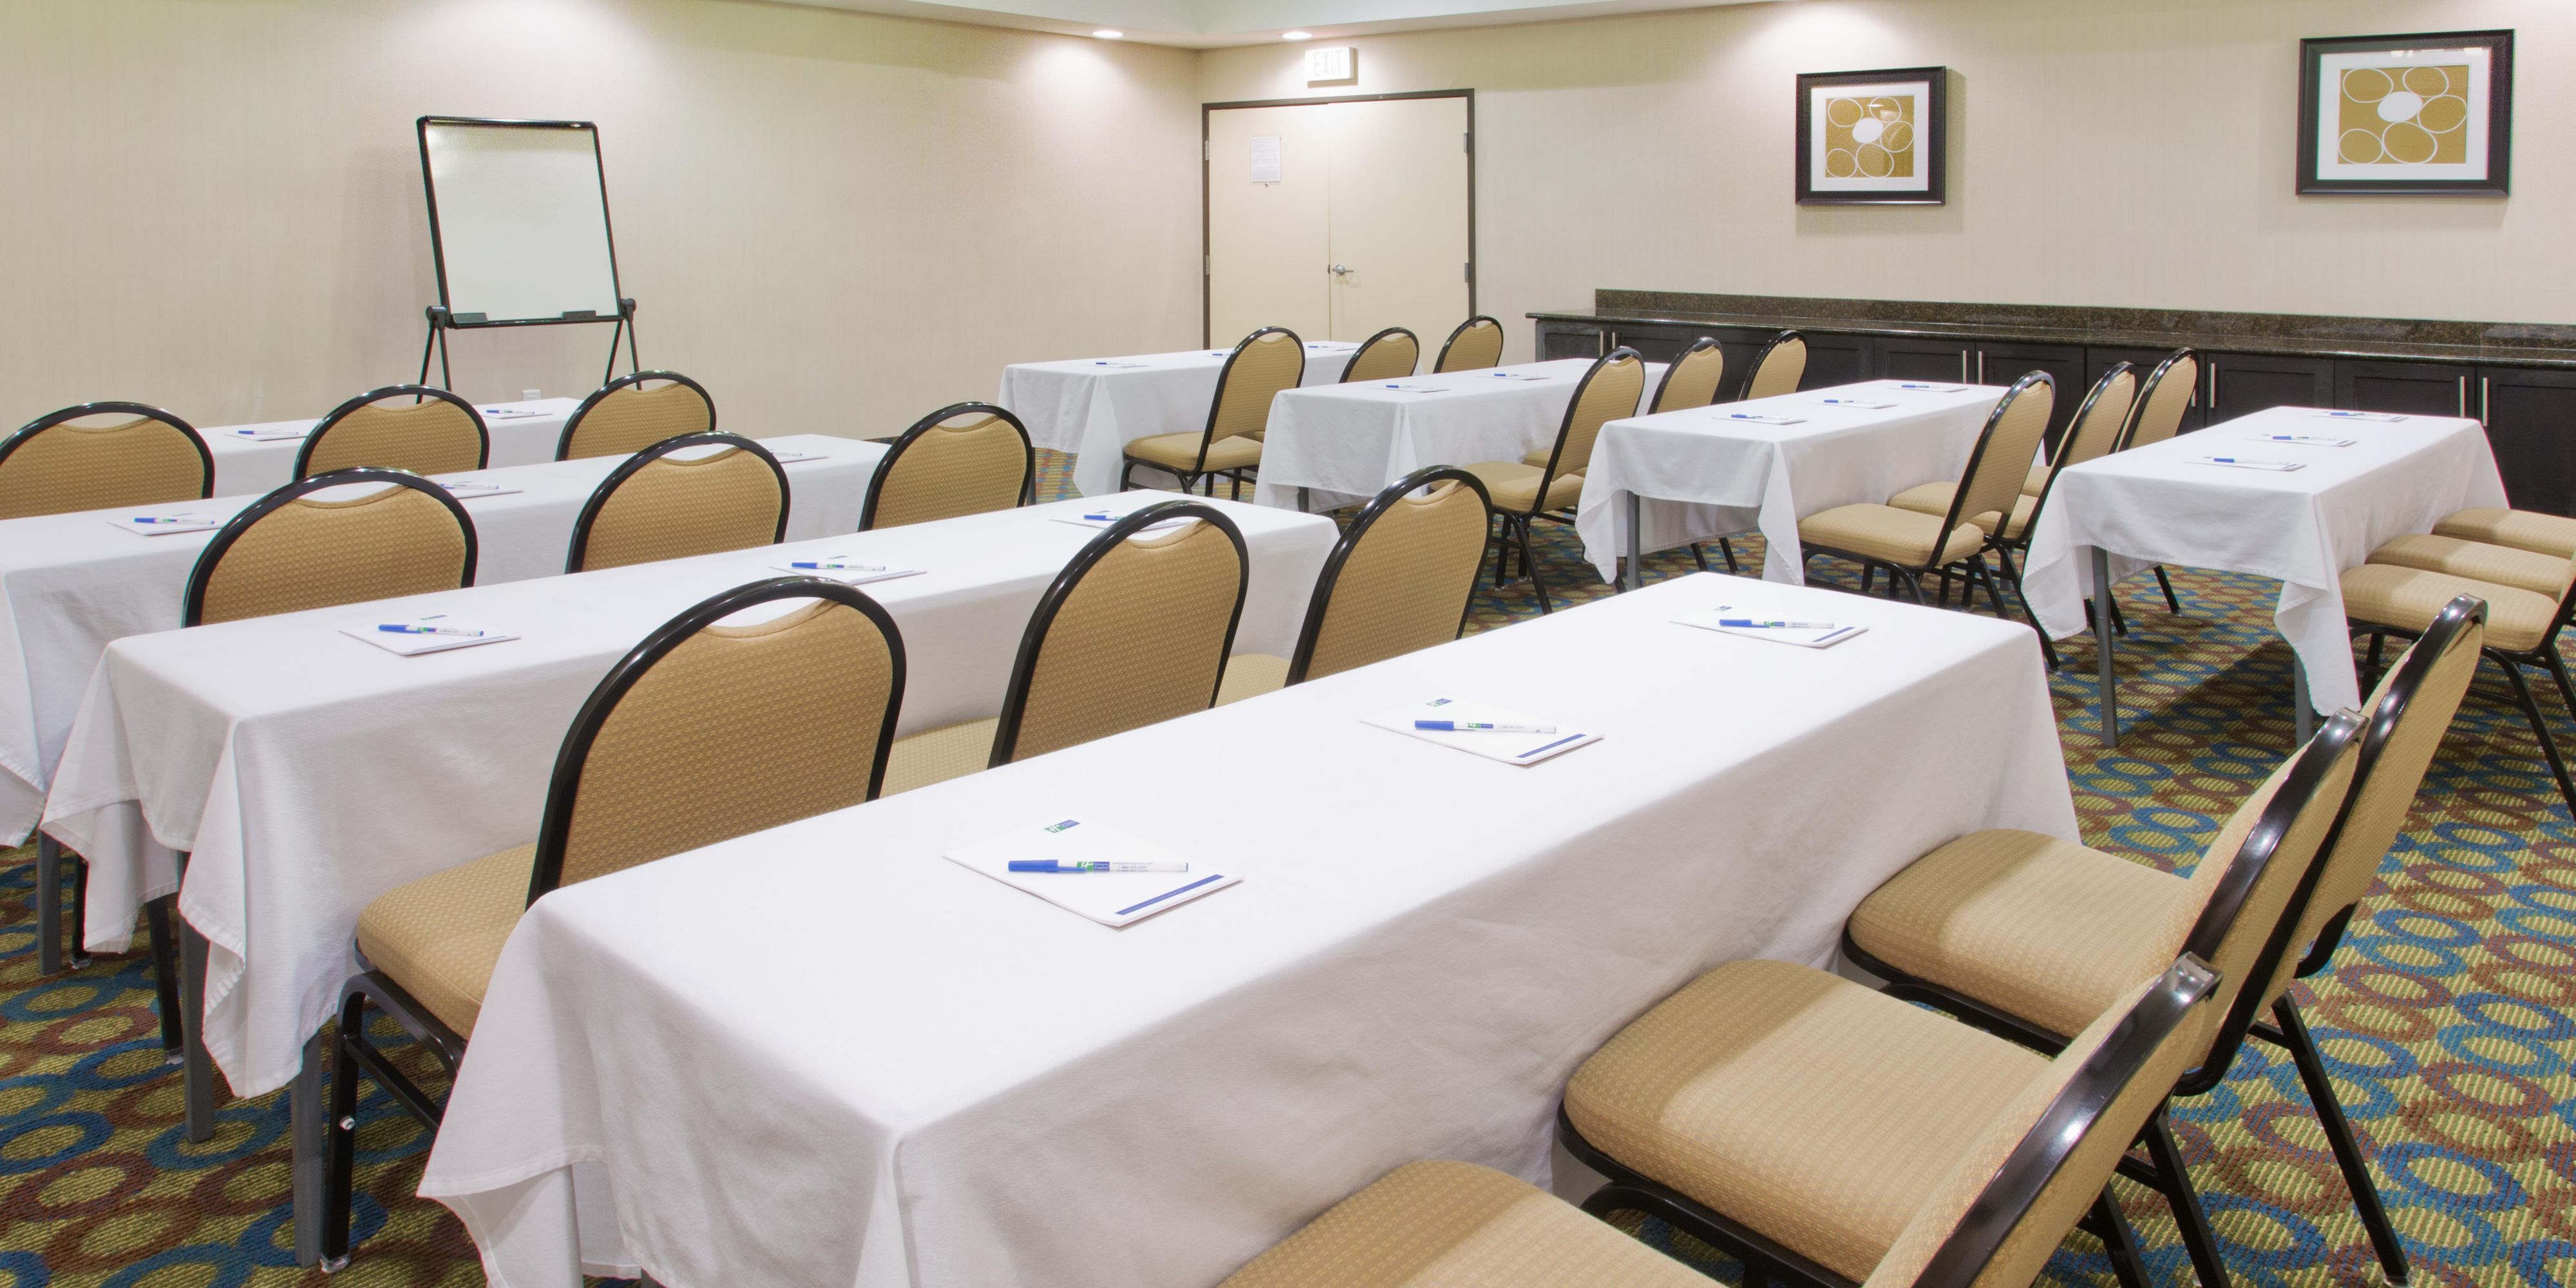 From baby showers to your next boardroom meeting. Our meeting space is suited for all your needs. 